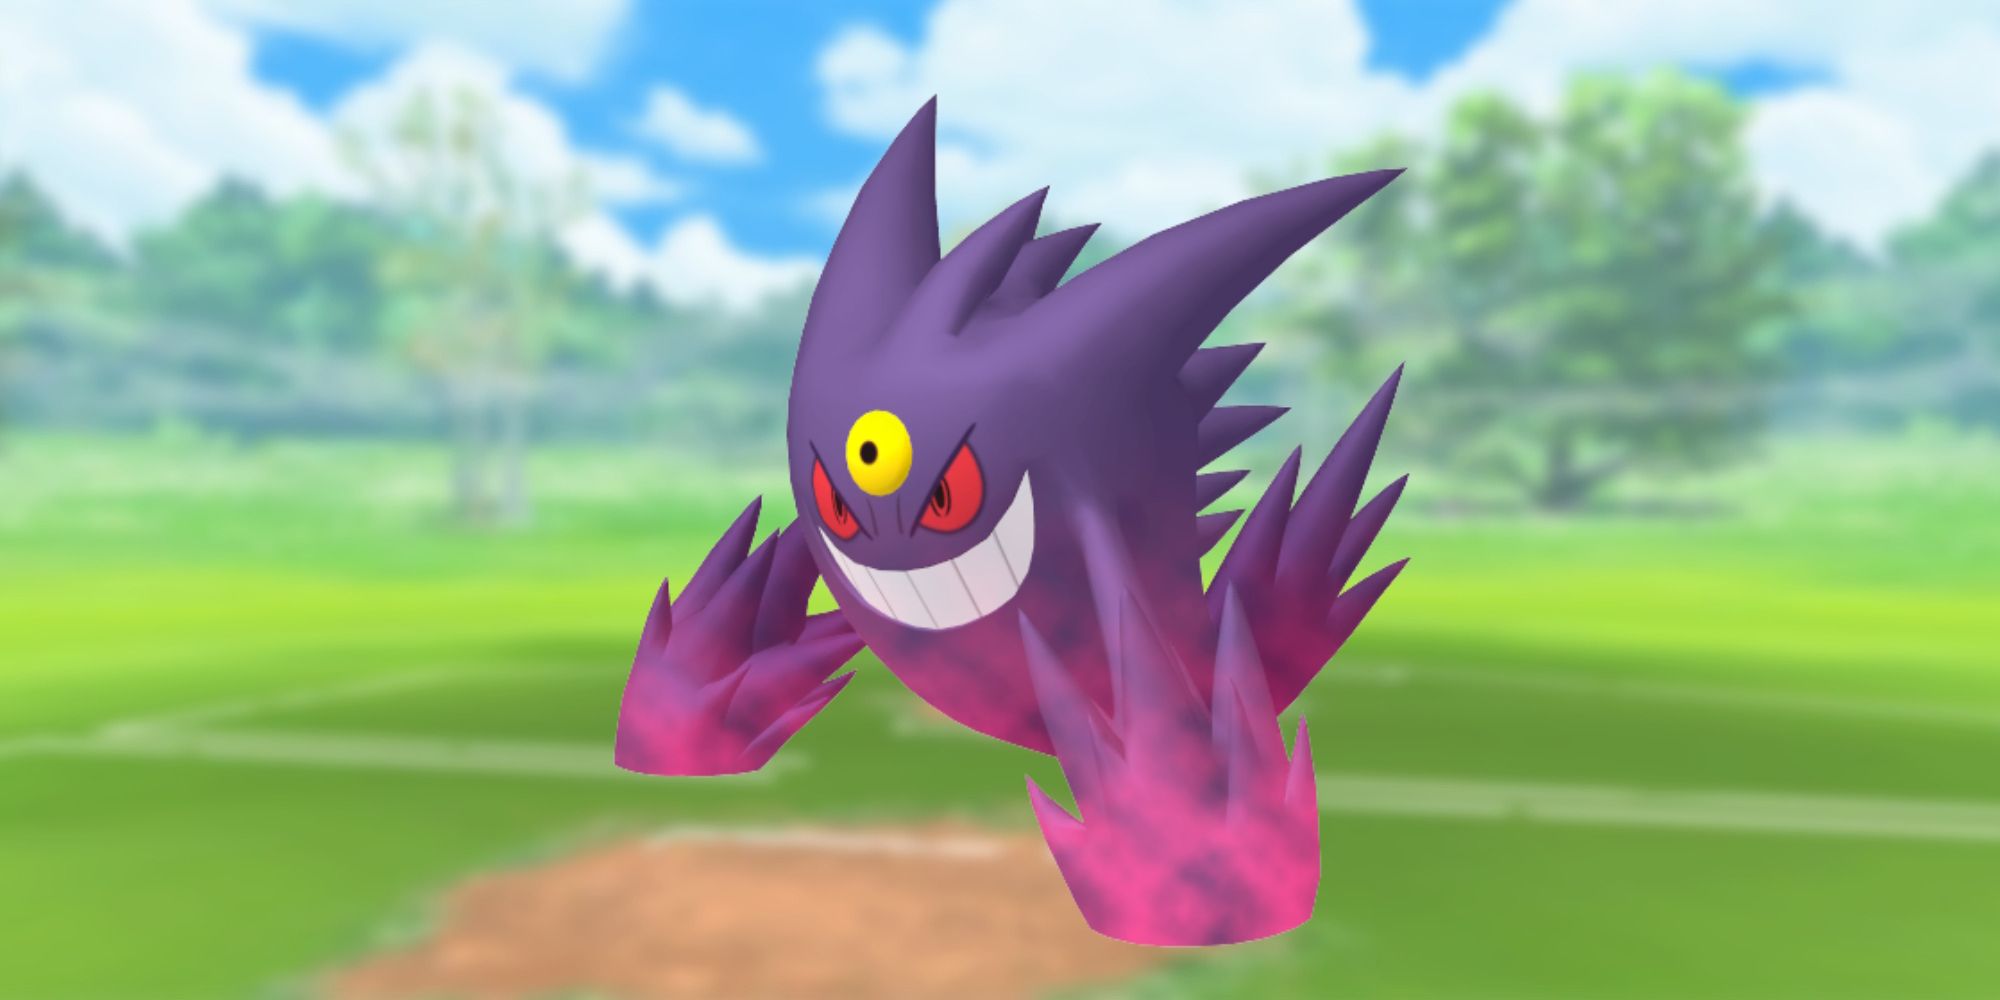 Mega Gengar from Pokemon with the Pokemon Go battlefield as the background